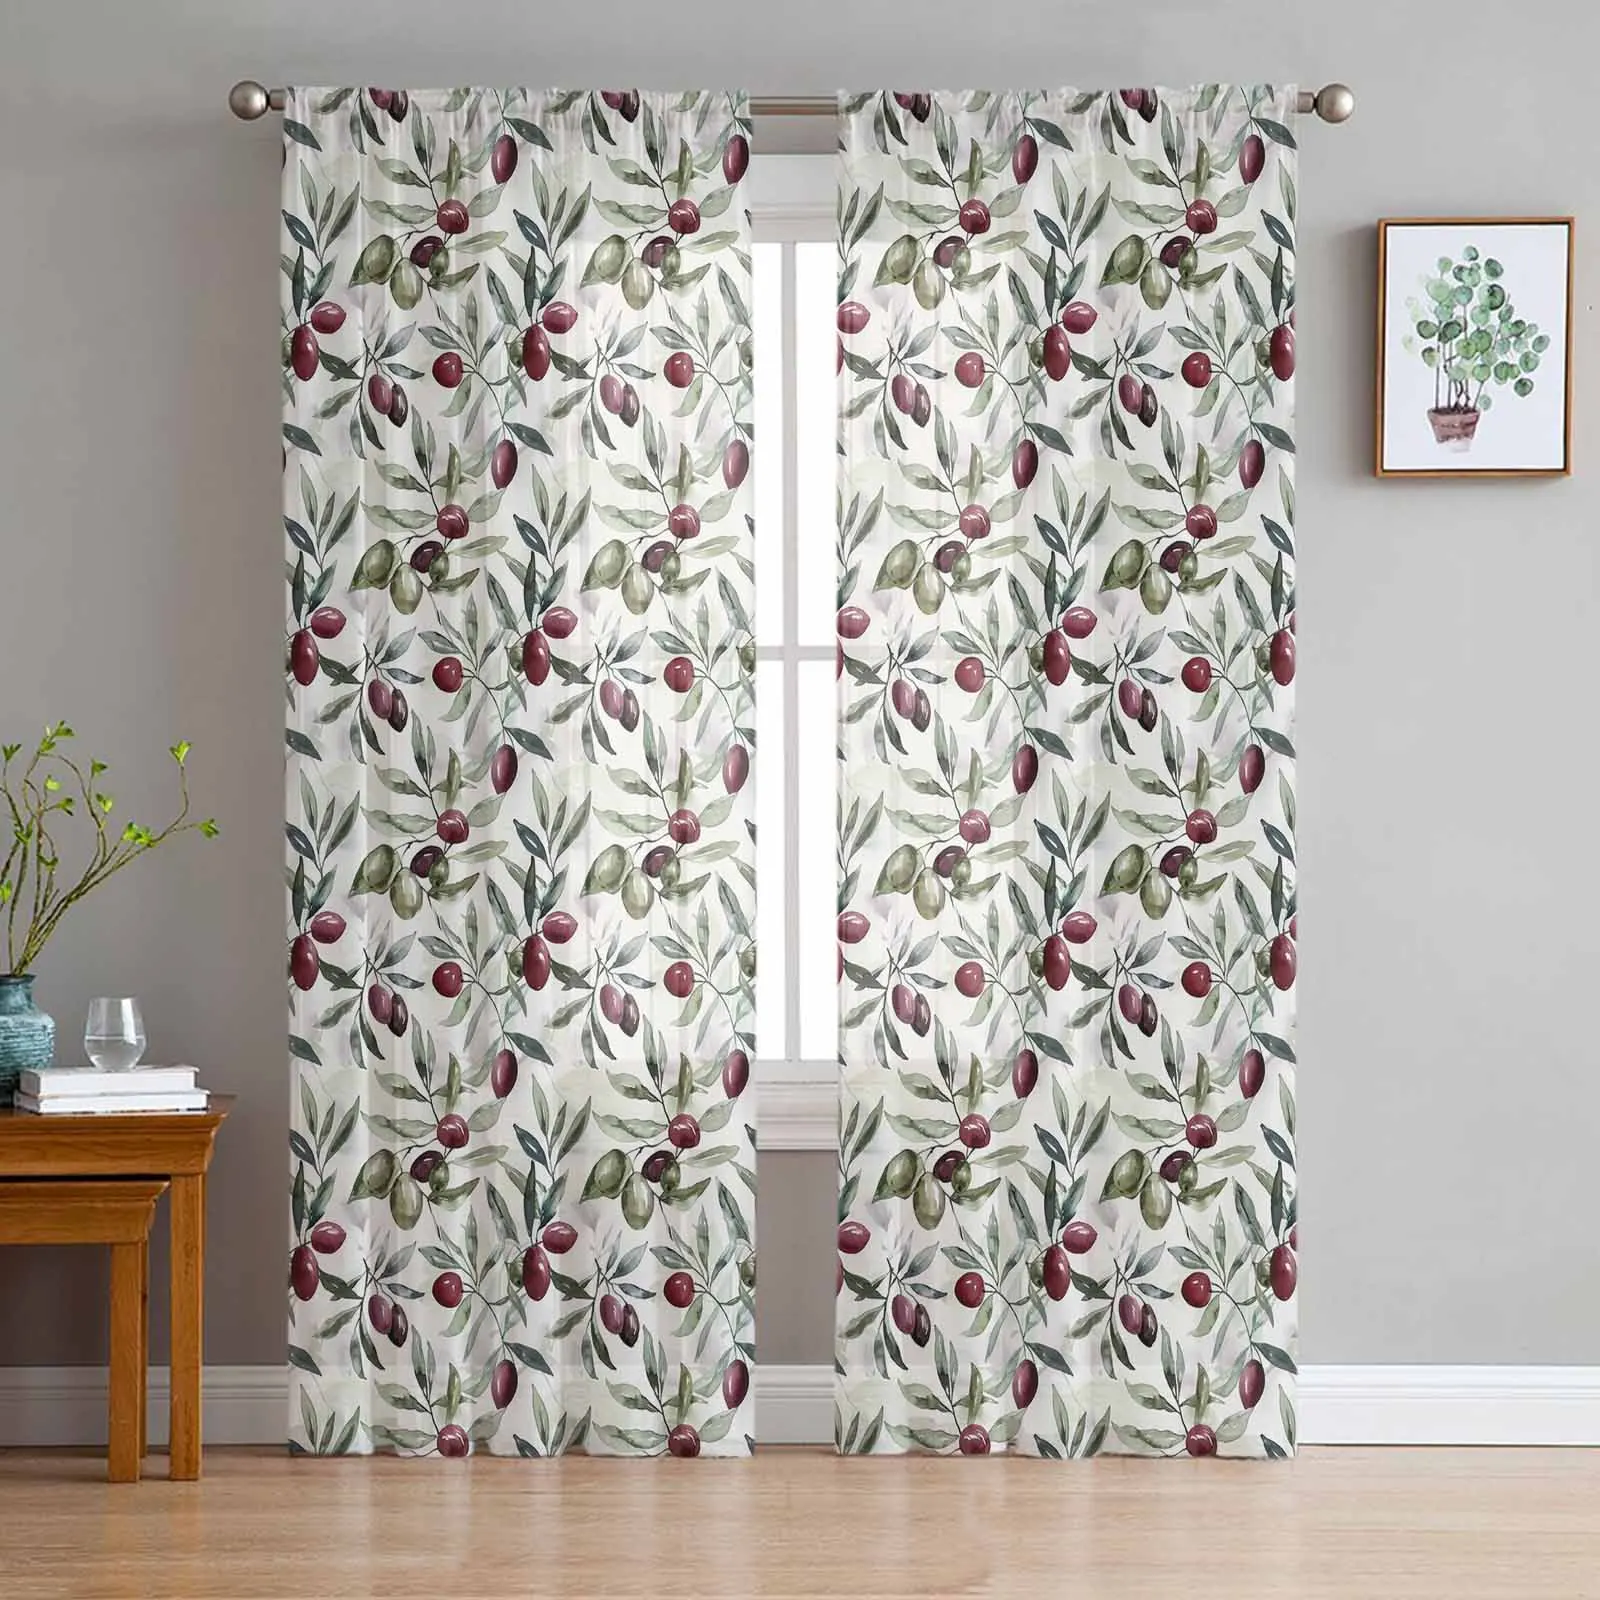 

Watercolor Fruit Leaf Plants Curtain For Living Room Bedroom Kitchen Window Tulle Curtains Home Essentials